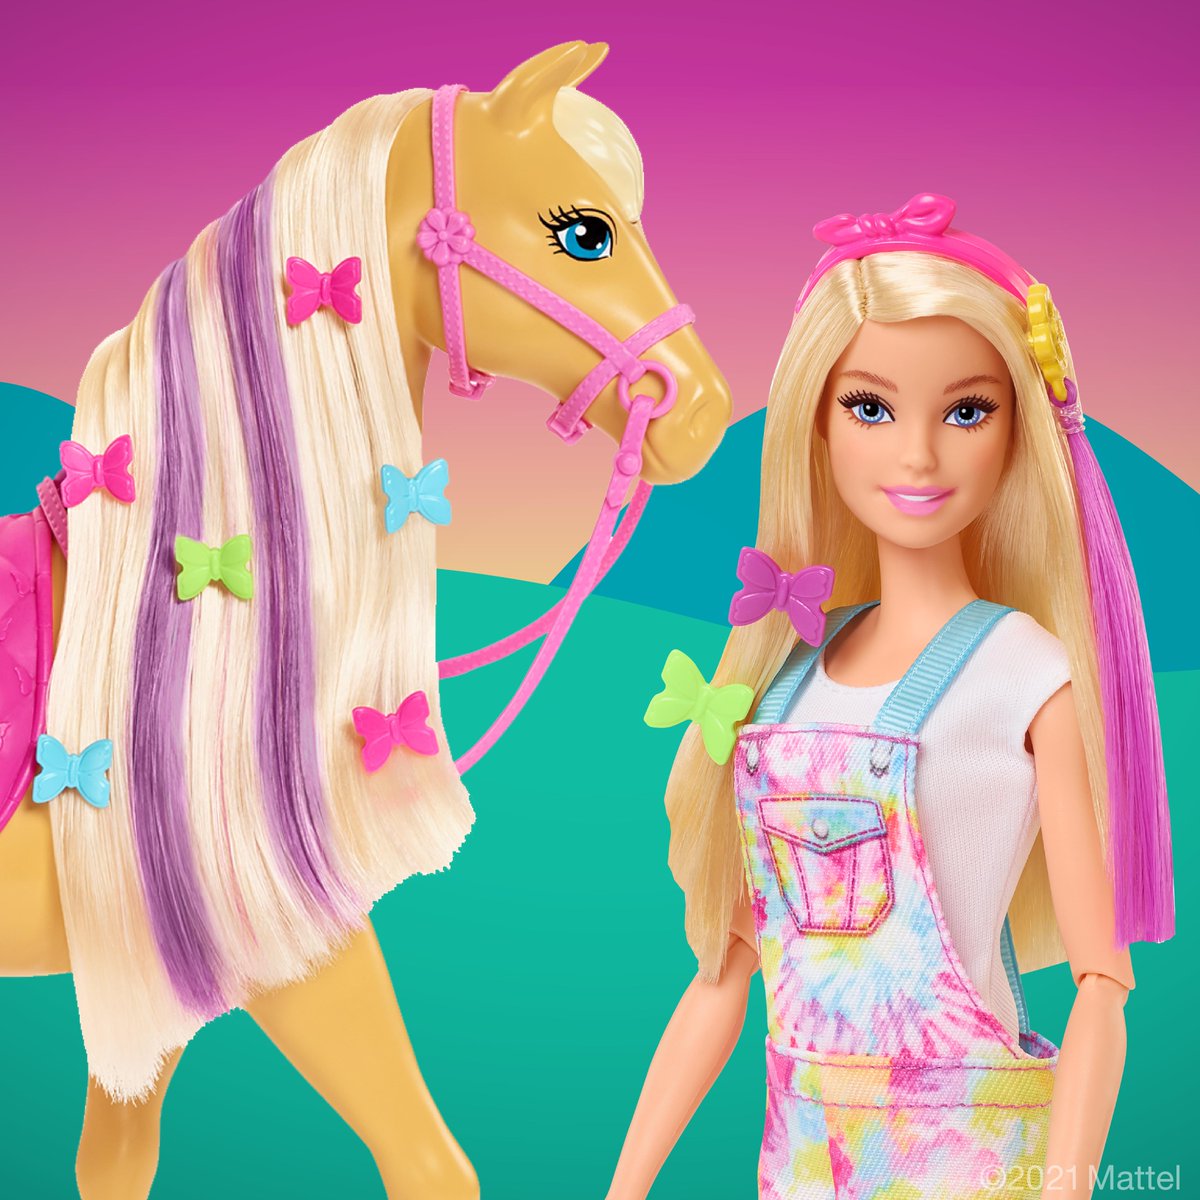 Barbie on Twitter: up for a summer of styling fun and animal friendship! 🐴 From color reveal highlights hair clip accessories, kids can saddle up for mane attraction no